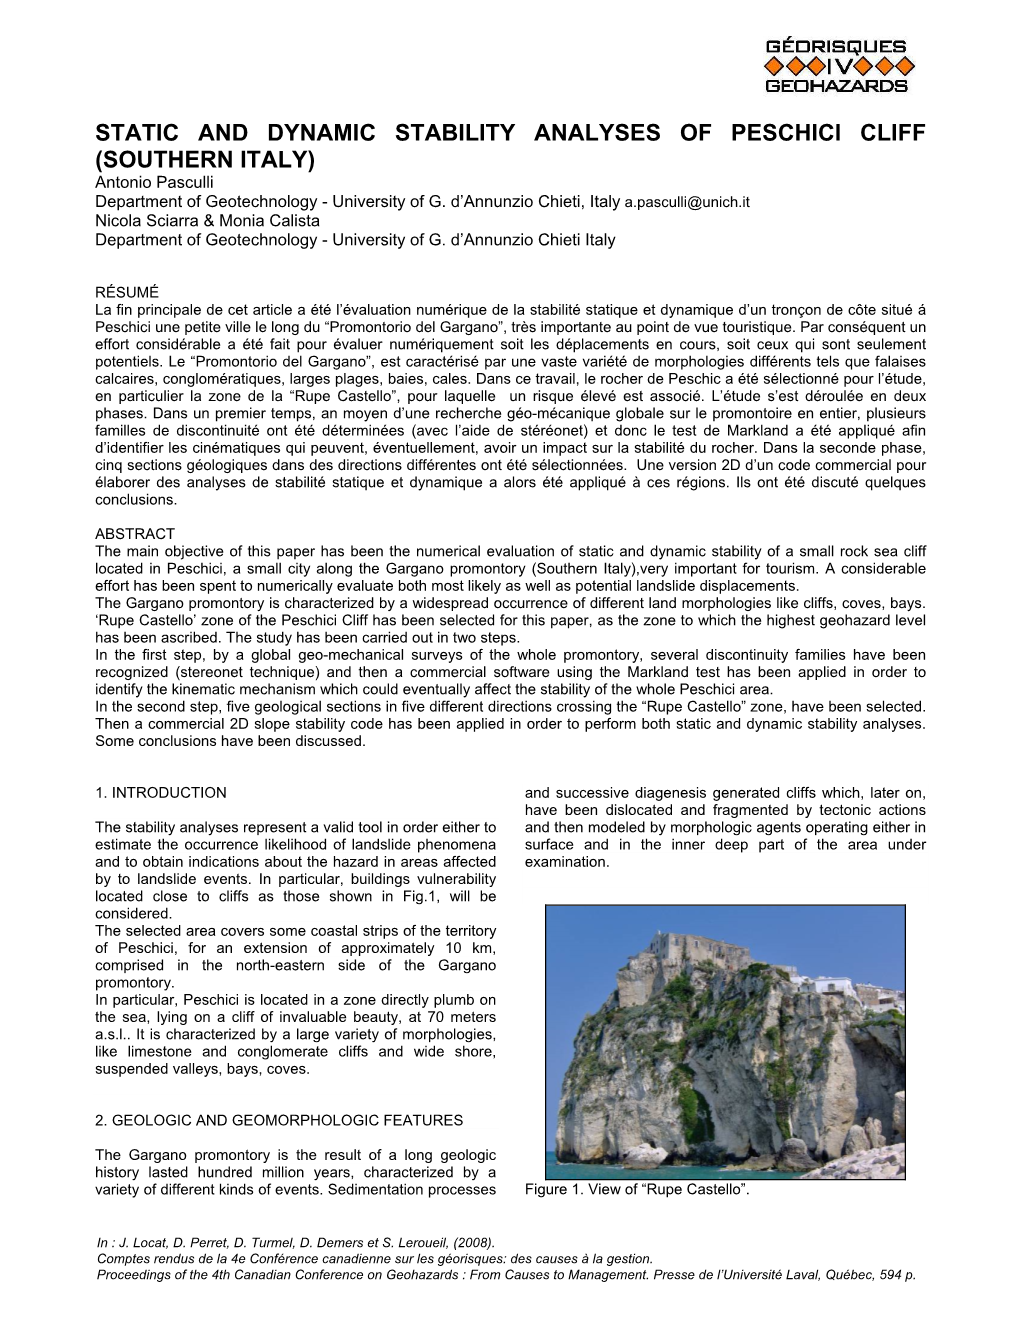 STATIC and DYNAMIC STABILITY ANALYSES of PESCHICI CLIFF (SOUTHERN ITALY) Antonio Pasculli Department of Geotechnology - University of G